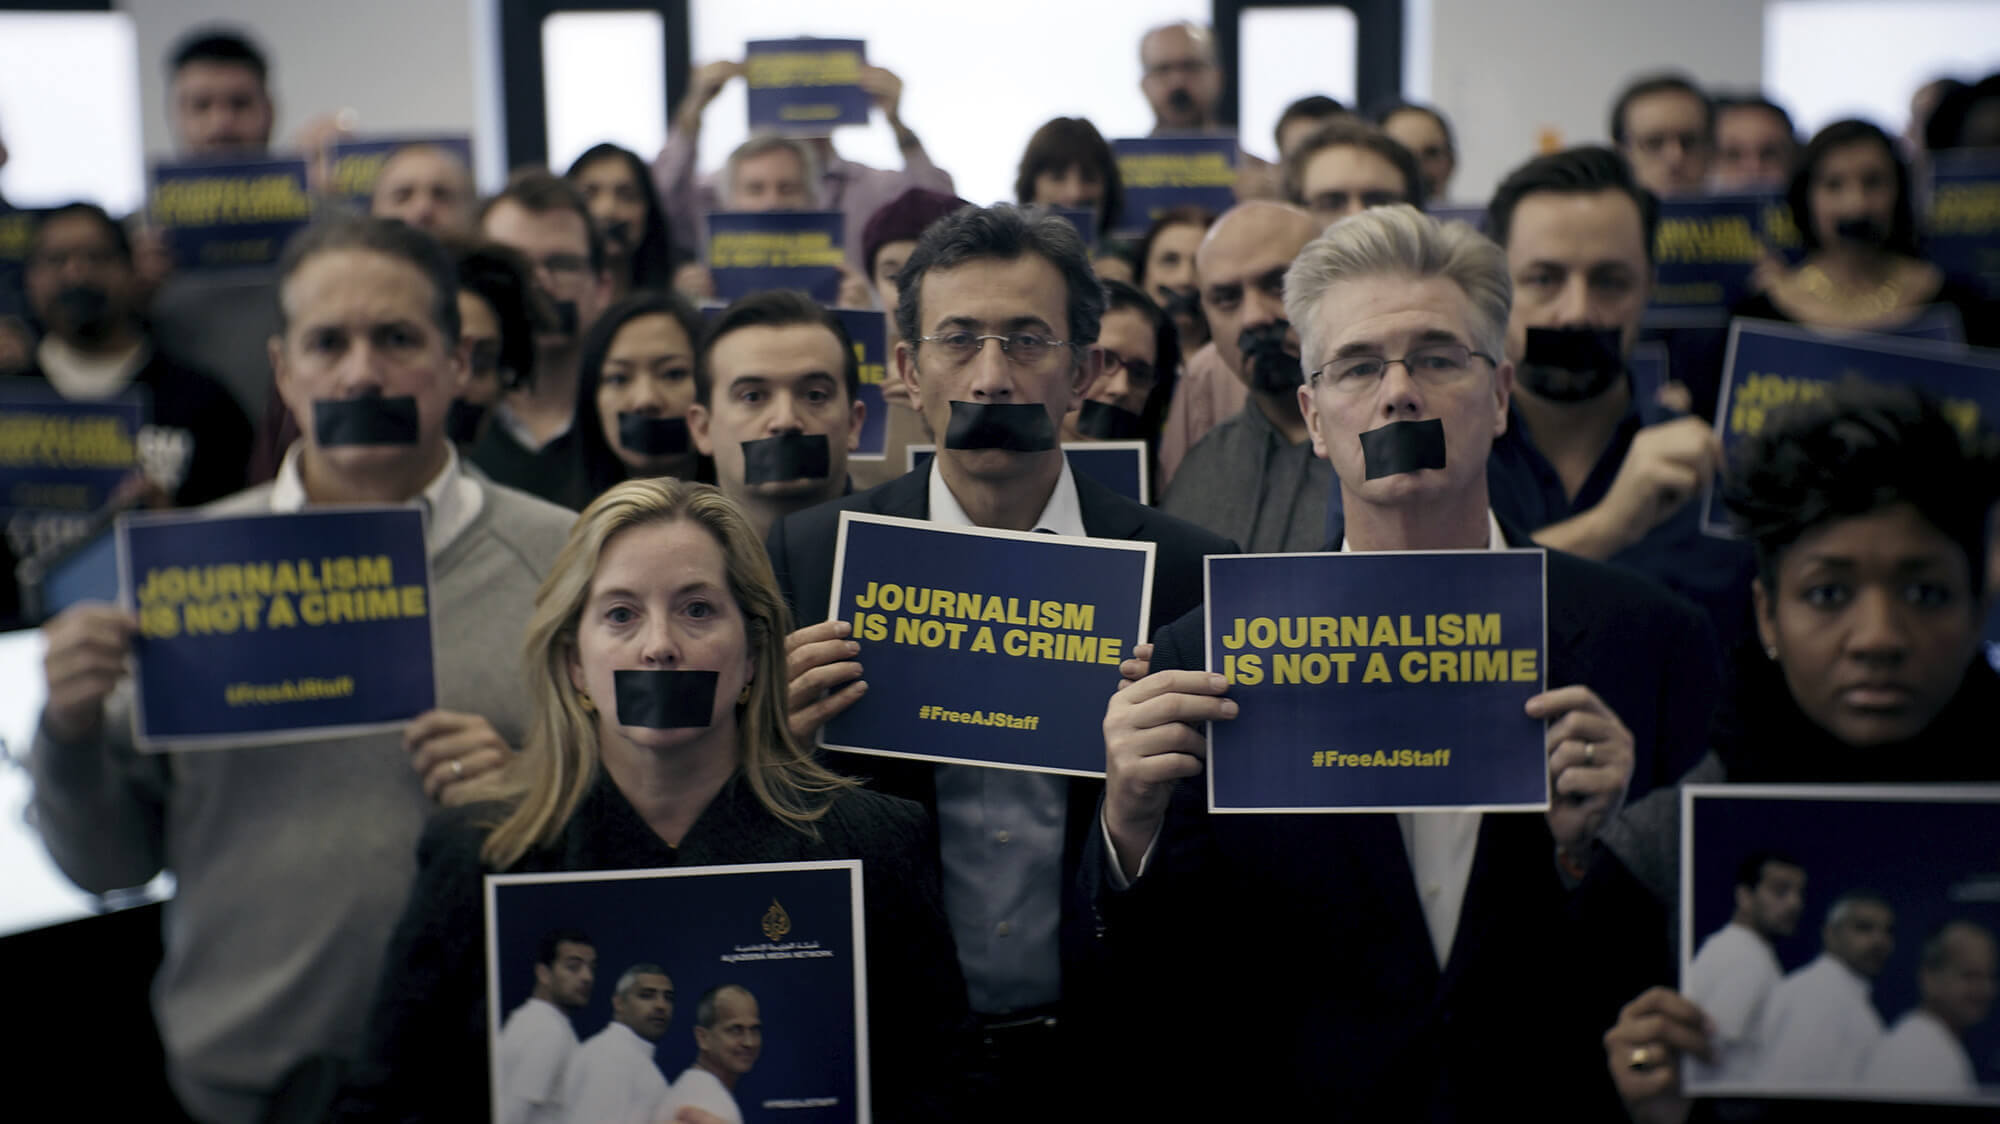 International Day to End Impunity for Crimes against Journalists